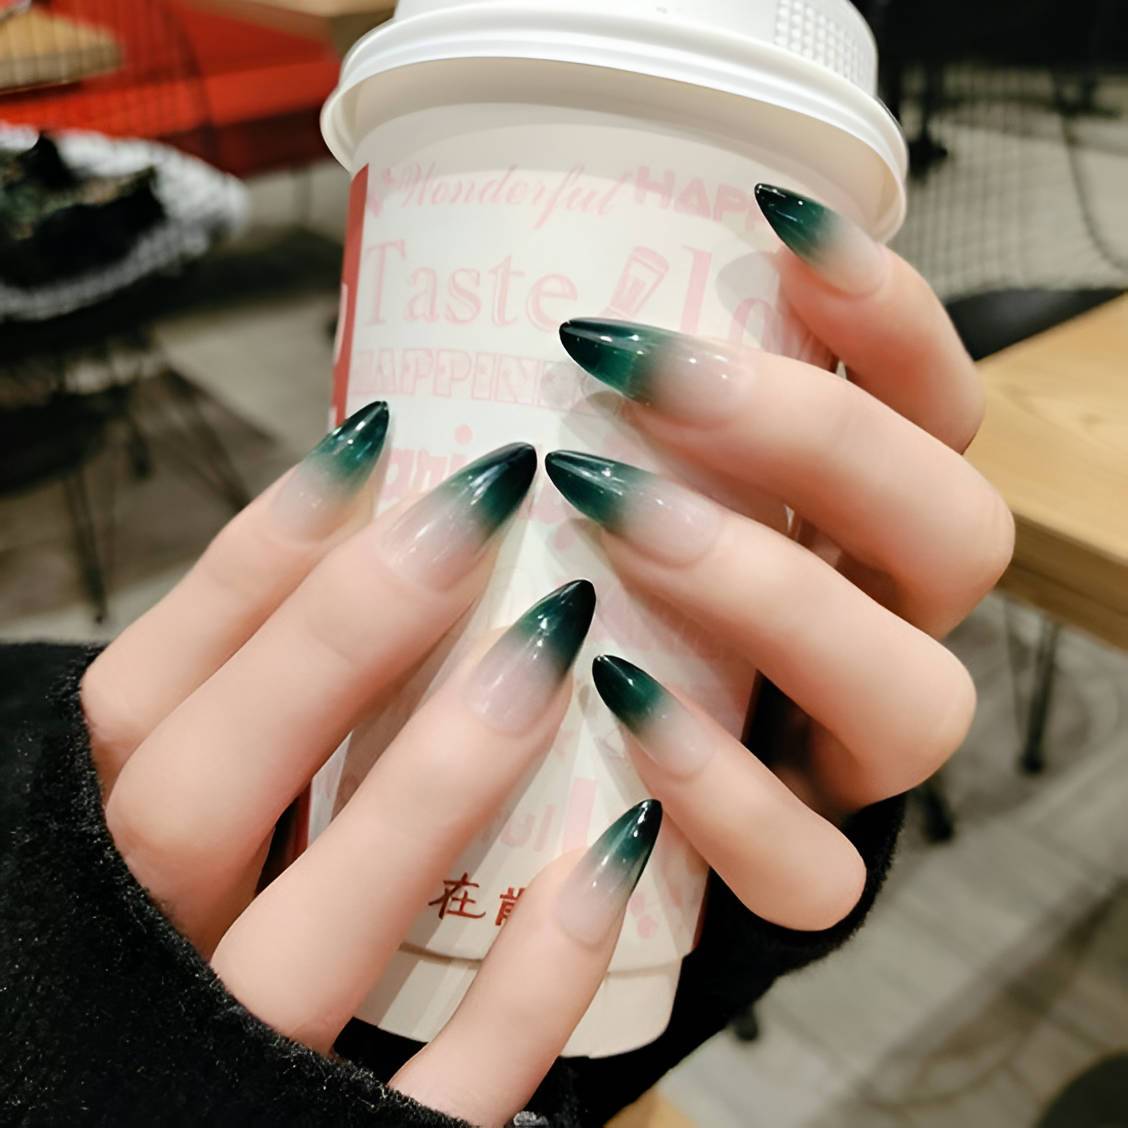 Stunning Stiletto Nail Designs Nobody Can Resist - 227